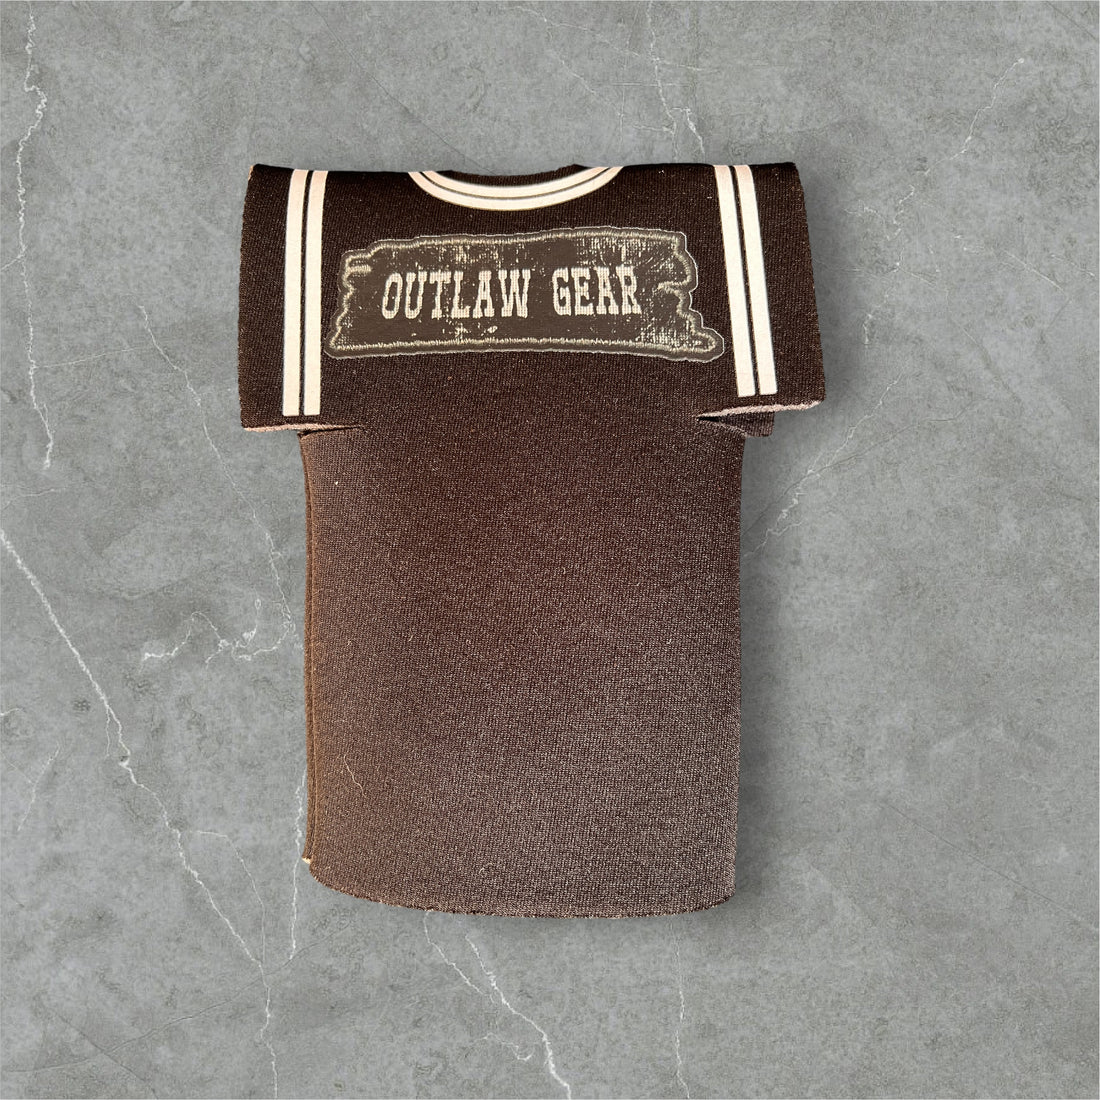  Image of the Griz Paw Football Jersey Drink Koozie, featuring a football jersey design with the Griz Paw logo, perfect for keeping your beverage cold on game day.